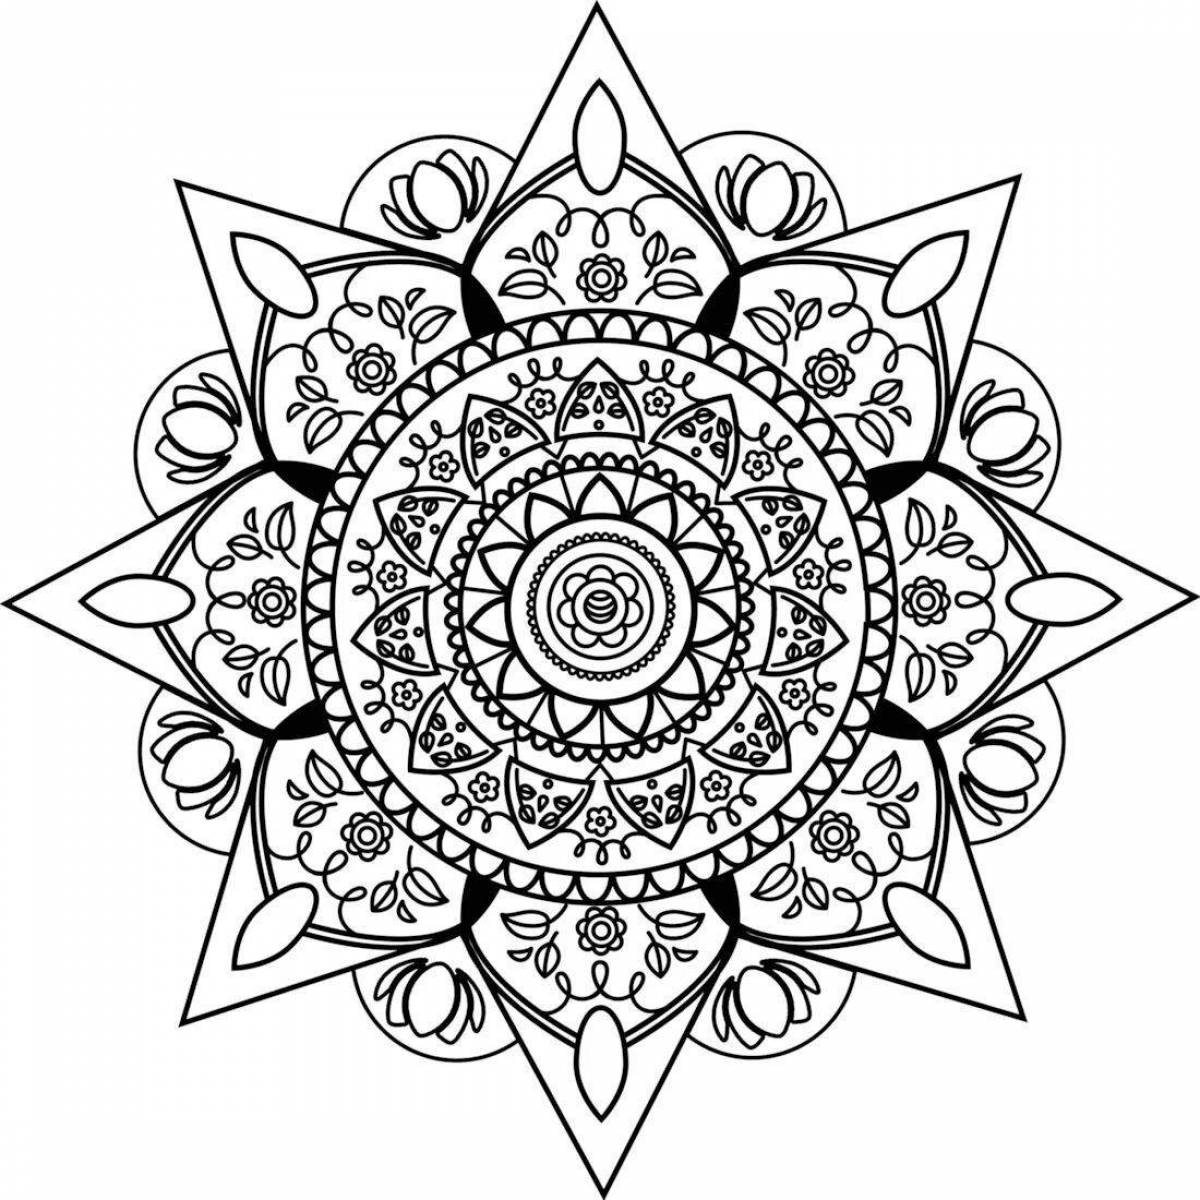 Refreshing coloring book for peace of mind